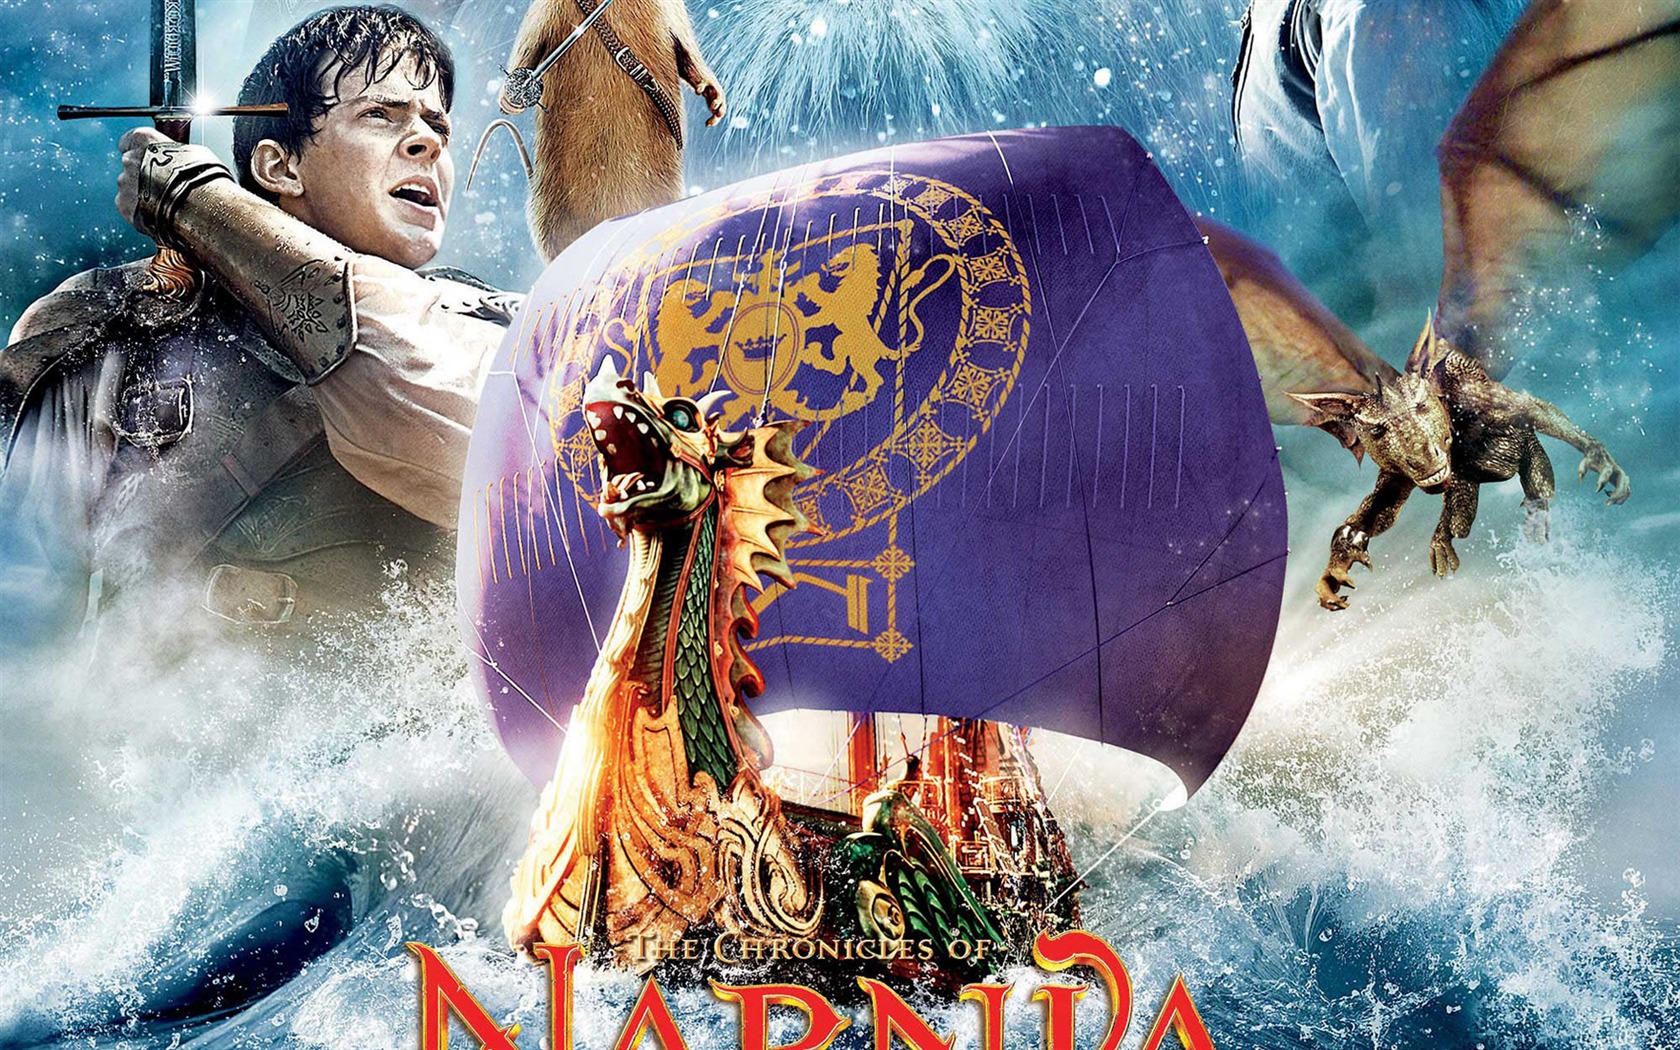 The Chronicles of Narnia: The Voyage of the fonds d'écran Passeur d'Aurore #1 - 1680x1050